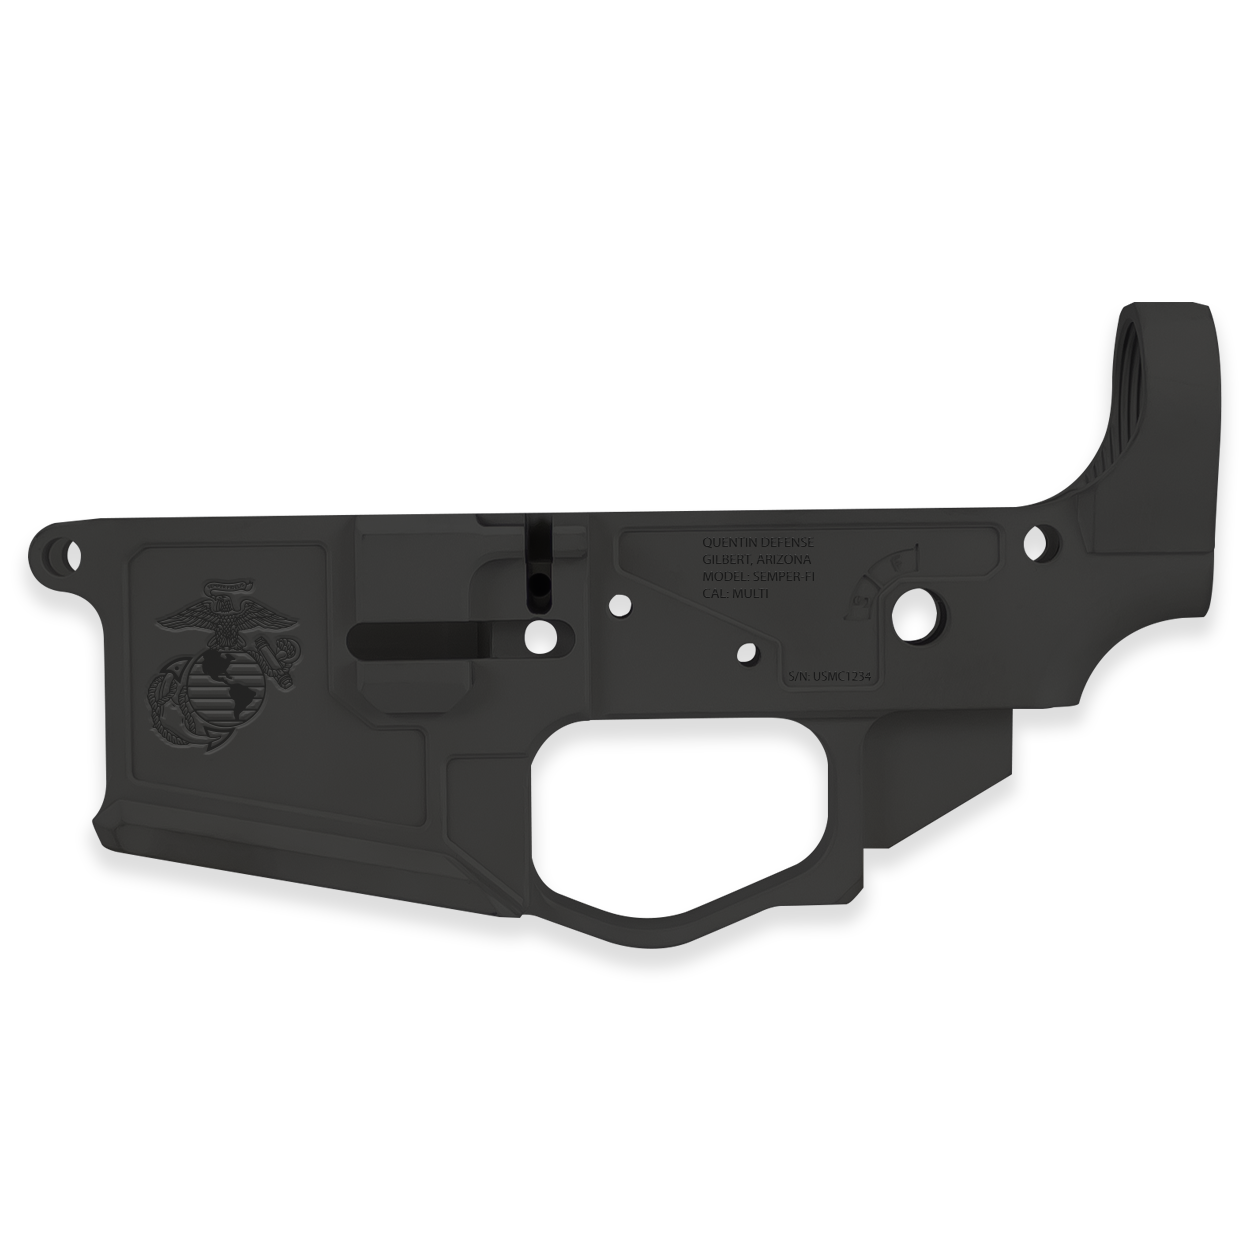 D-15 MILITARY THEMED BILLET LOWER RECEIVERS